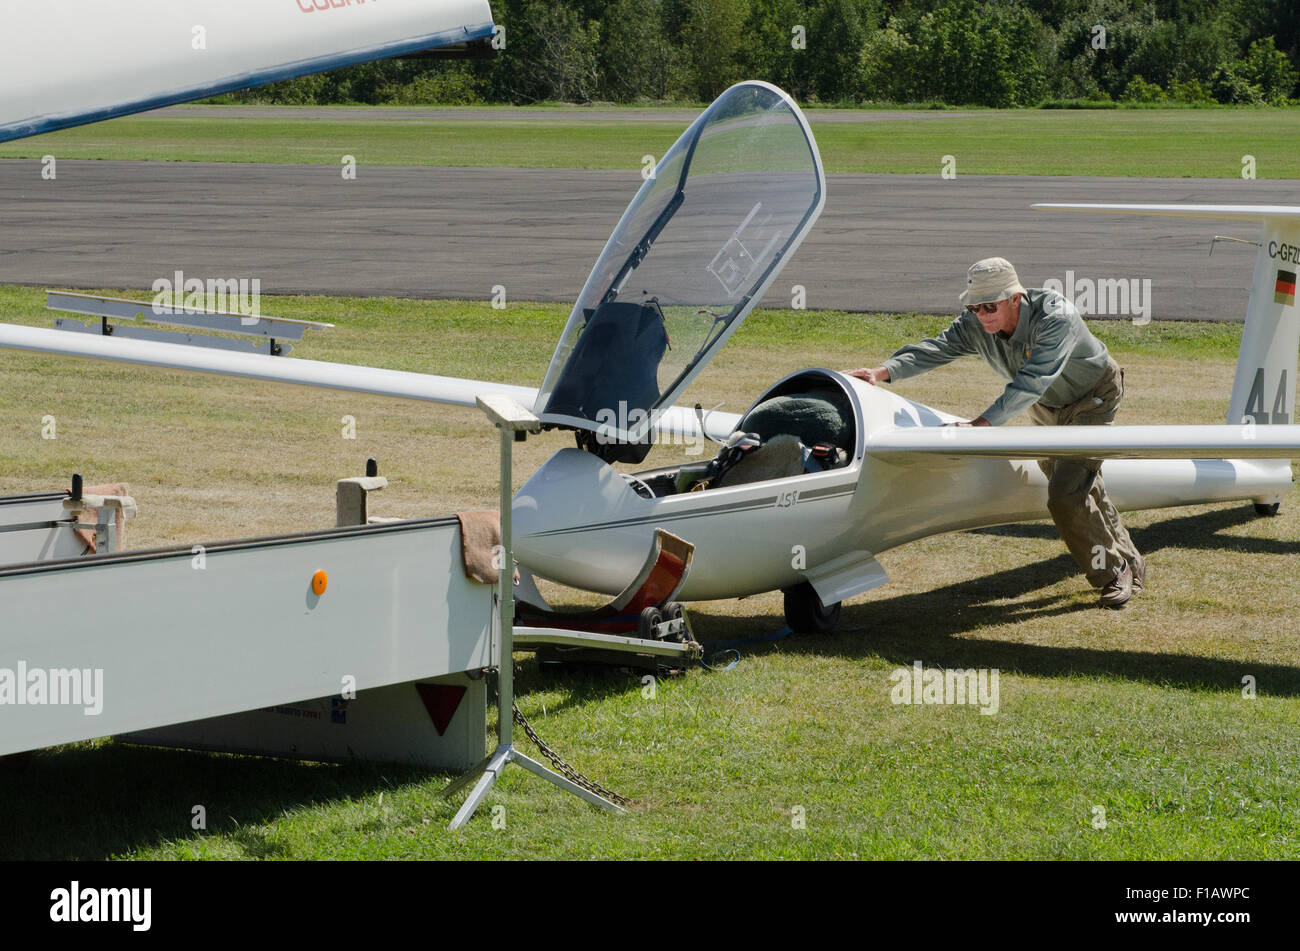 S.ailplane pilot positions his plane for loading on trailer Stock Photo